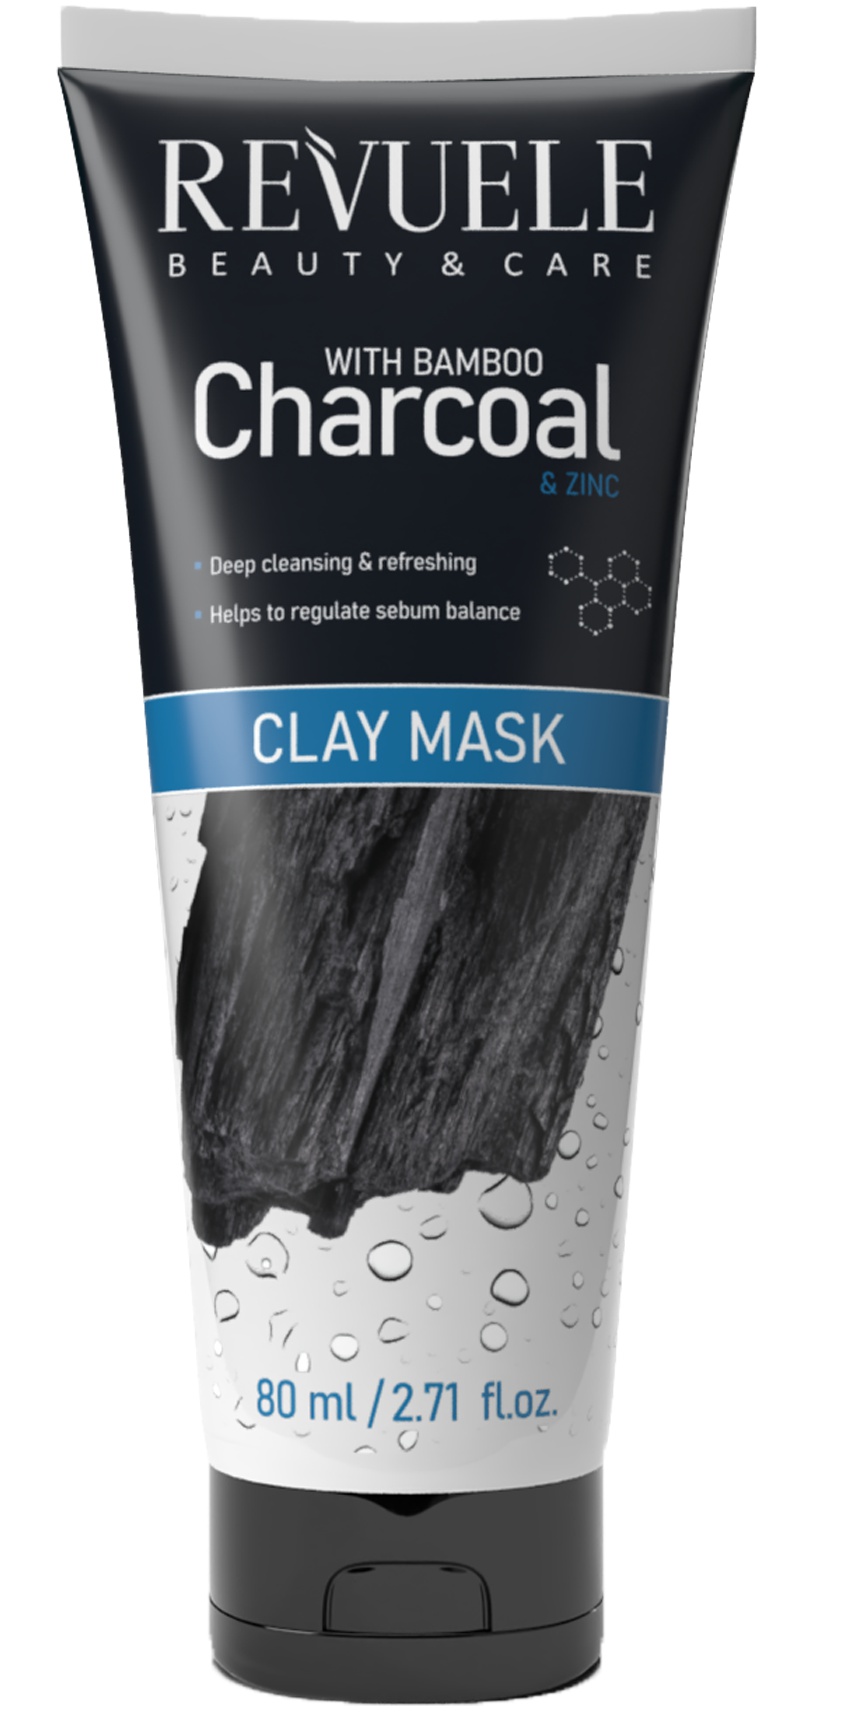 Revuele Bamboo Charcoal Clay Mask